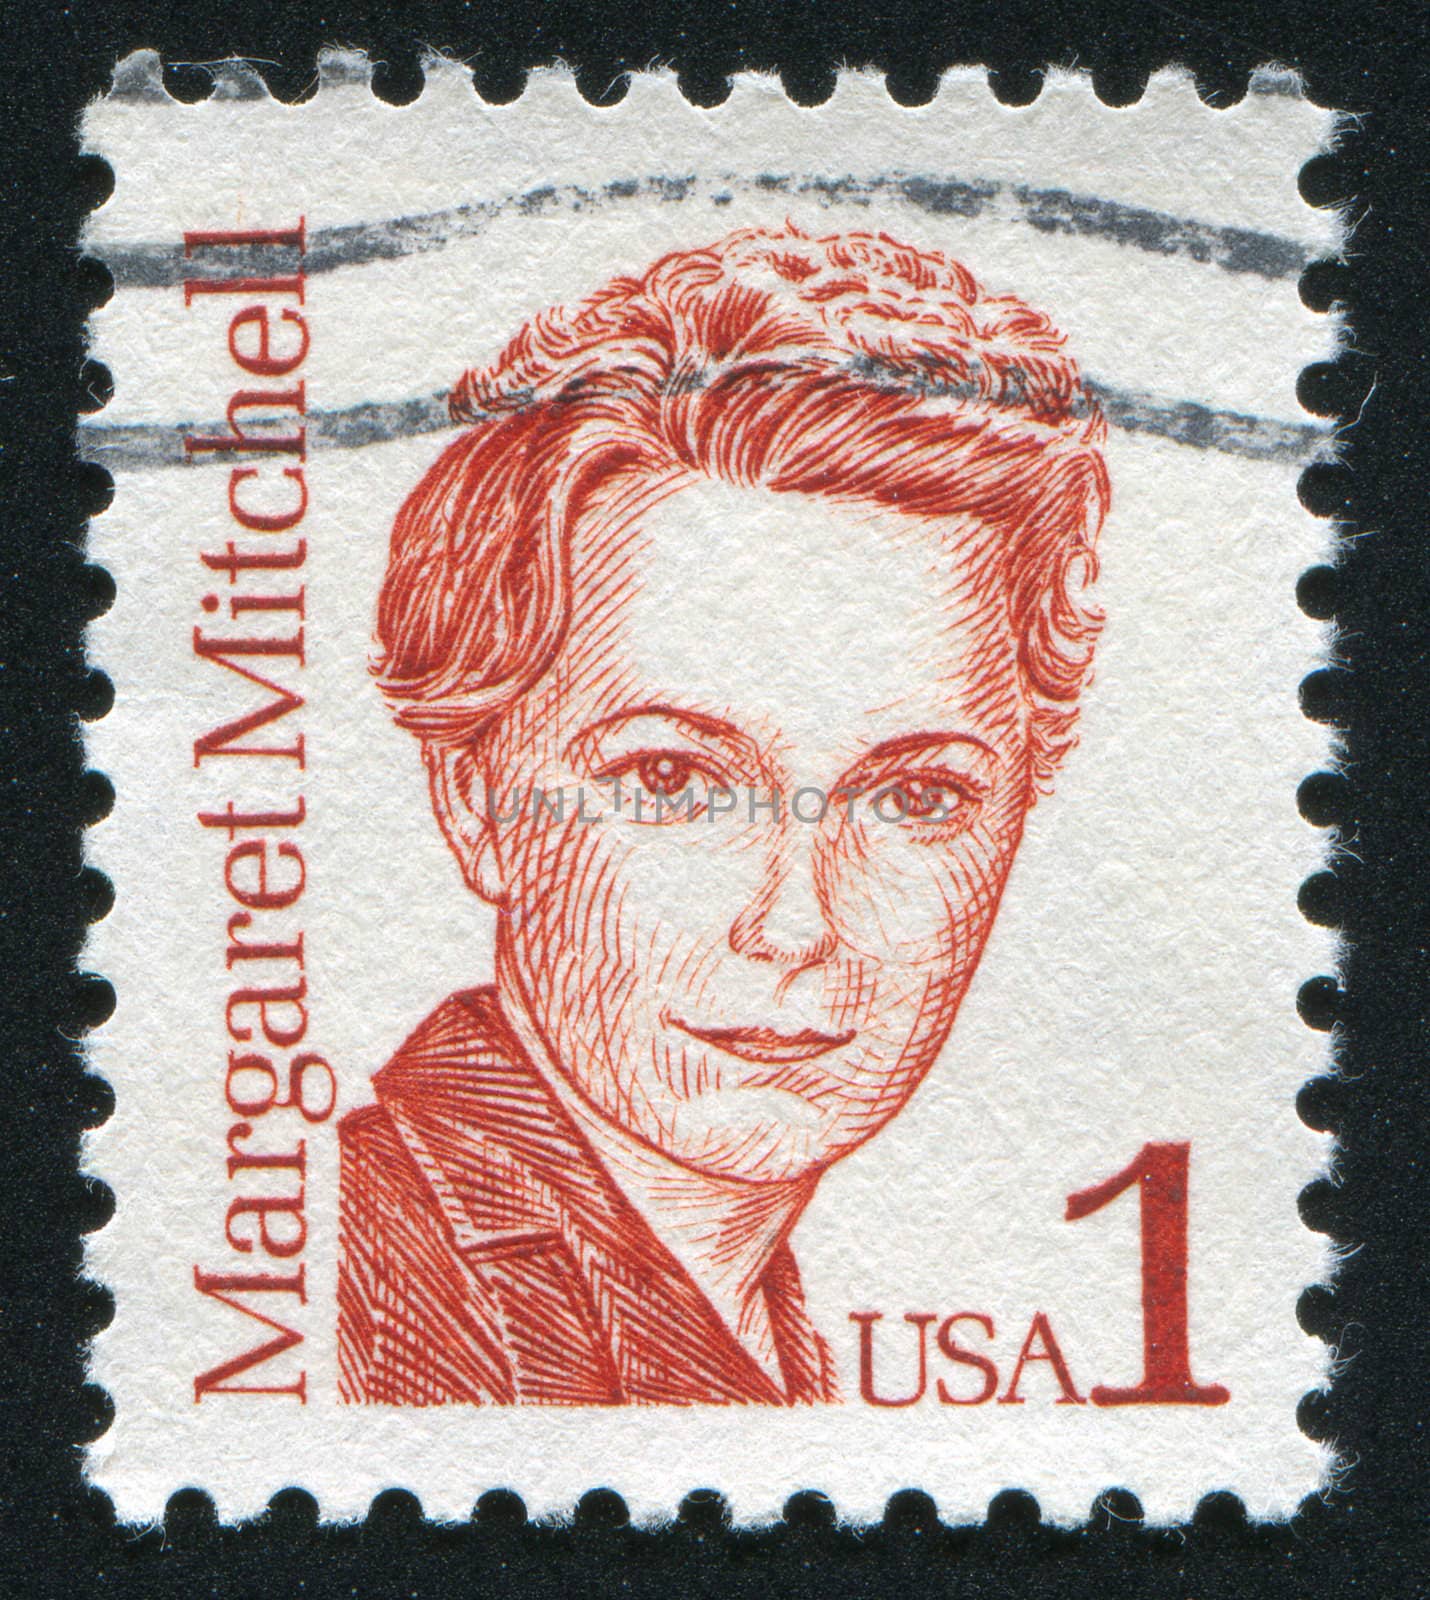 UNITED STATES - CIRCA 1986: stamp printed by United states, shows Margaret Mitchell, circa 1986